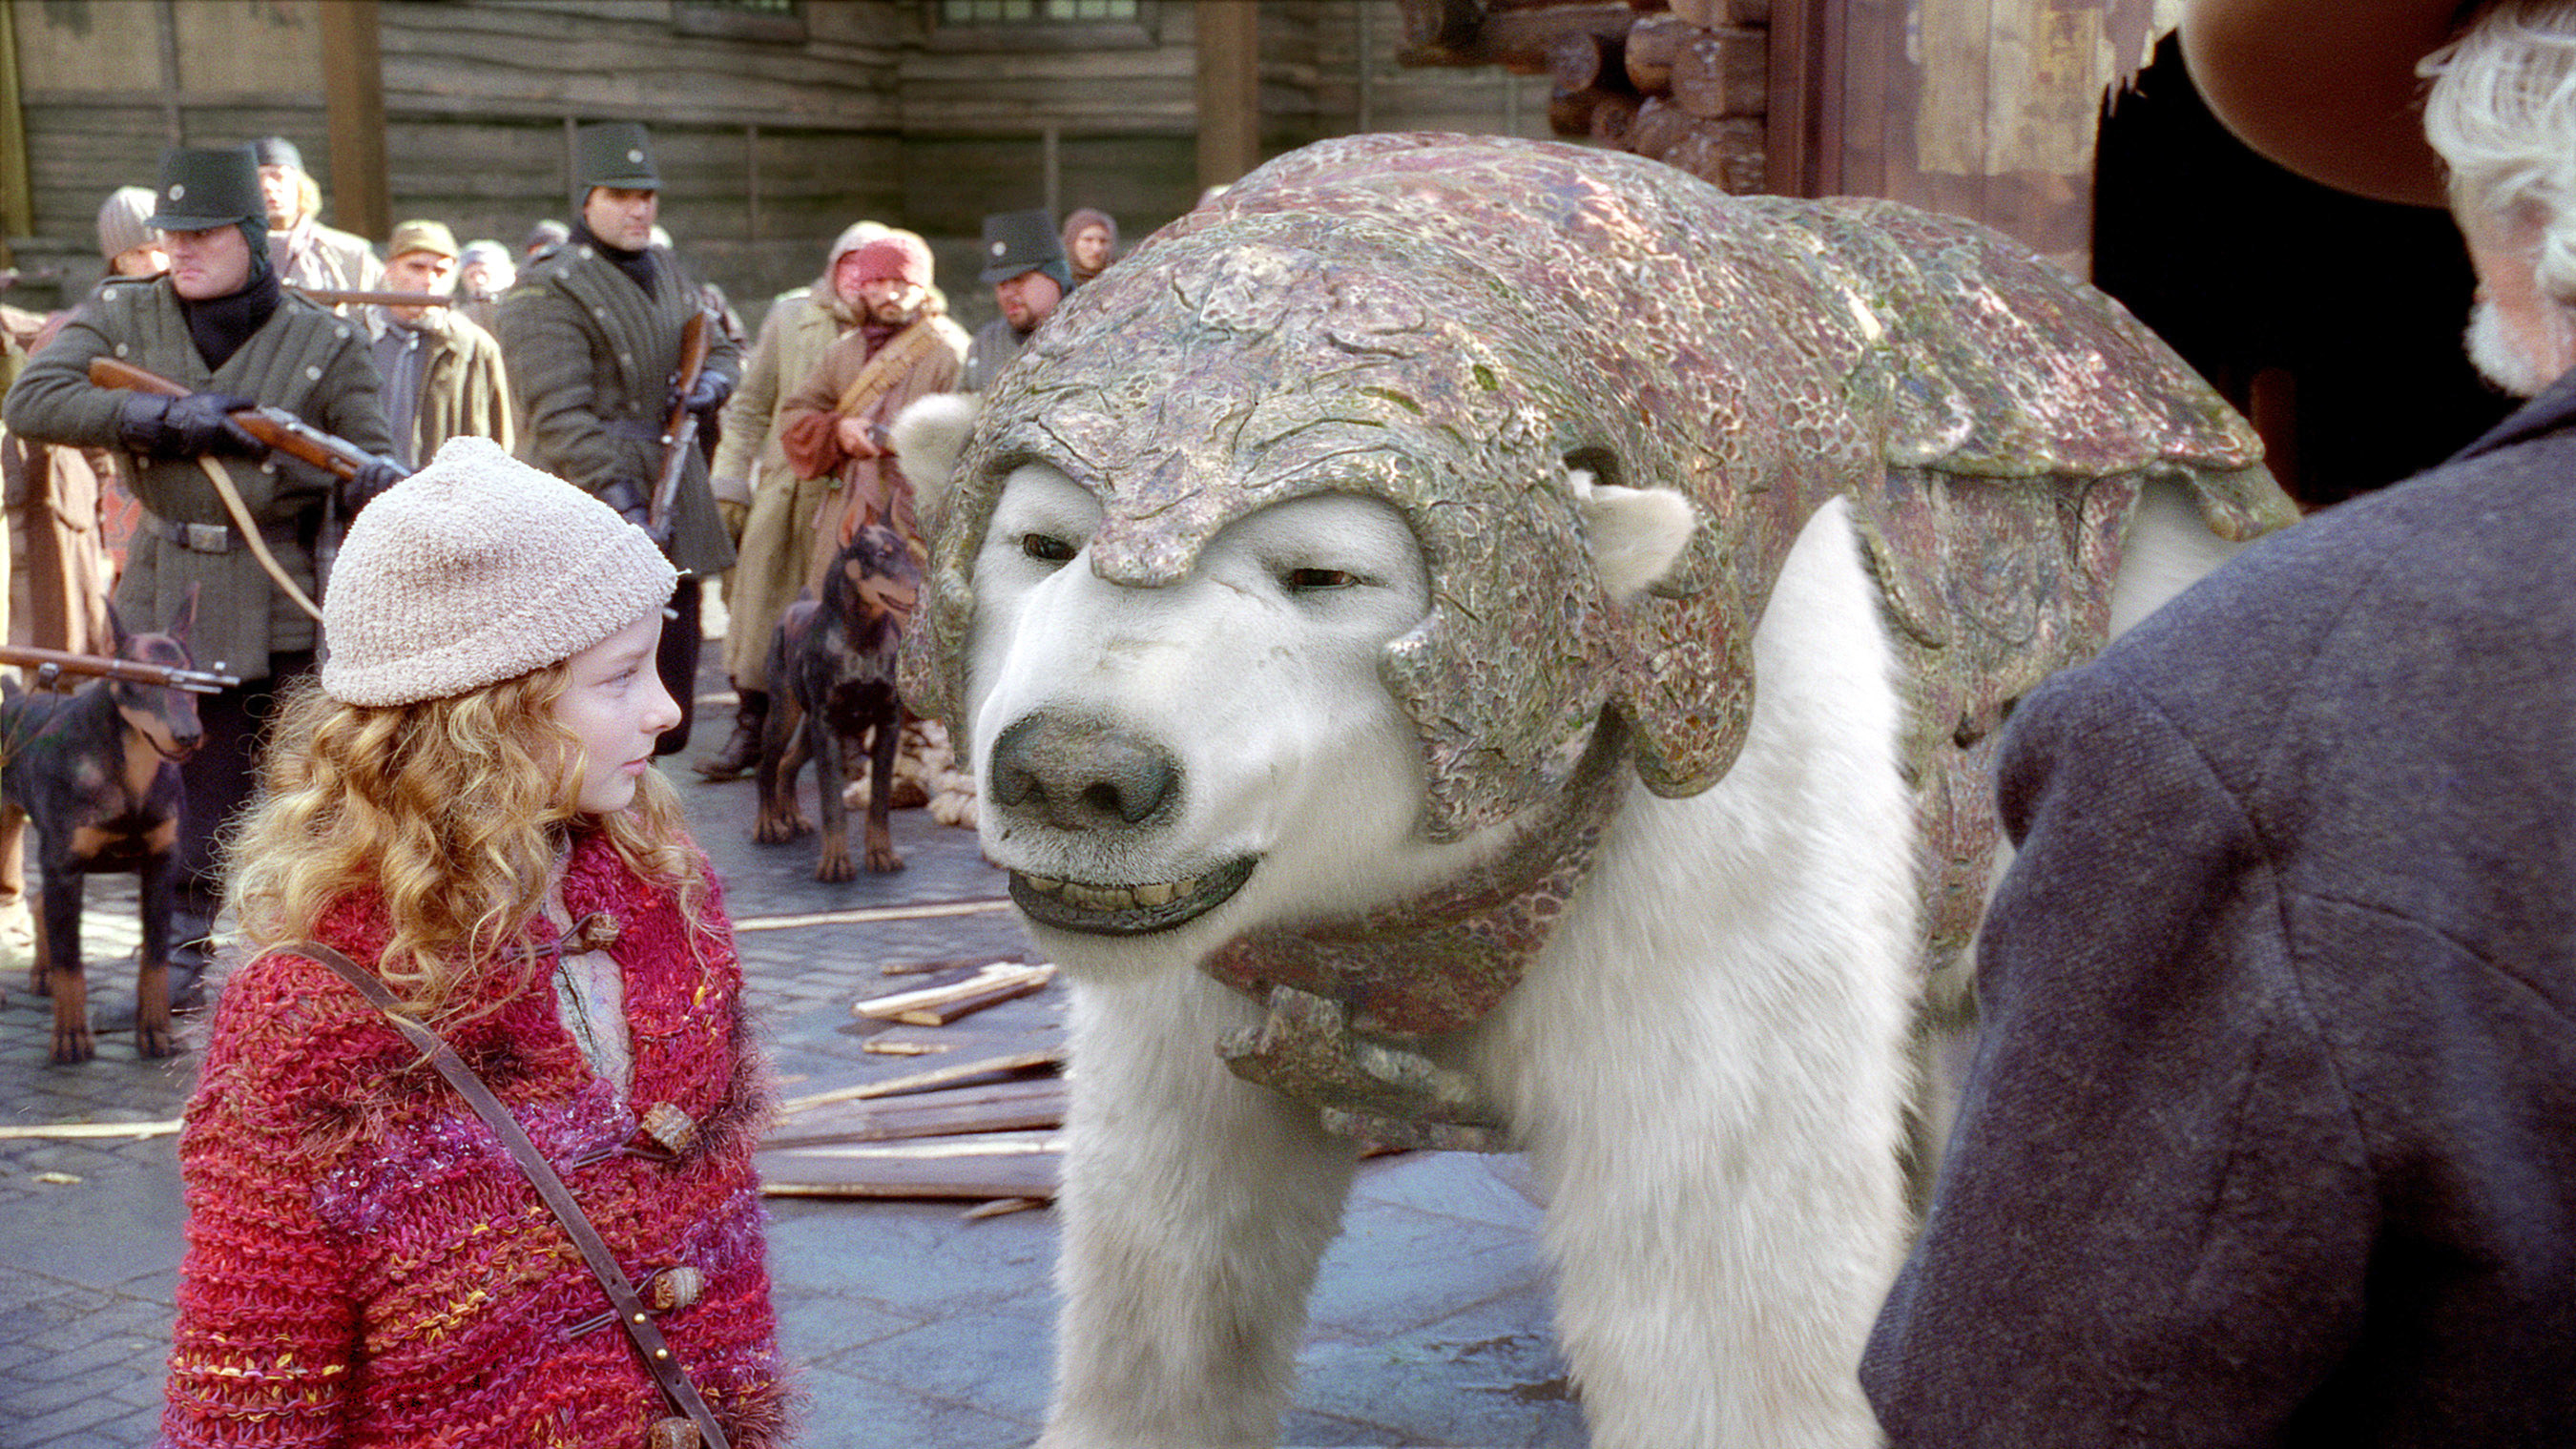 Lyra and Iorek Byrnison - the armored bear - in the film